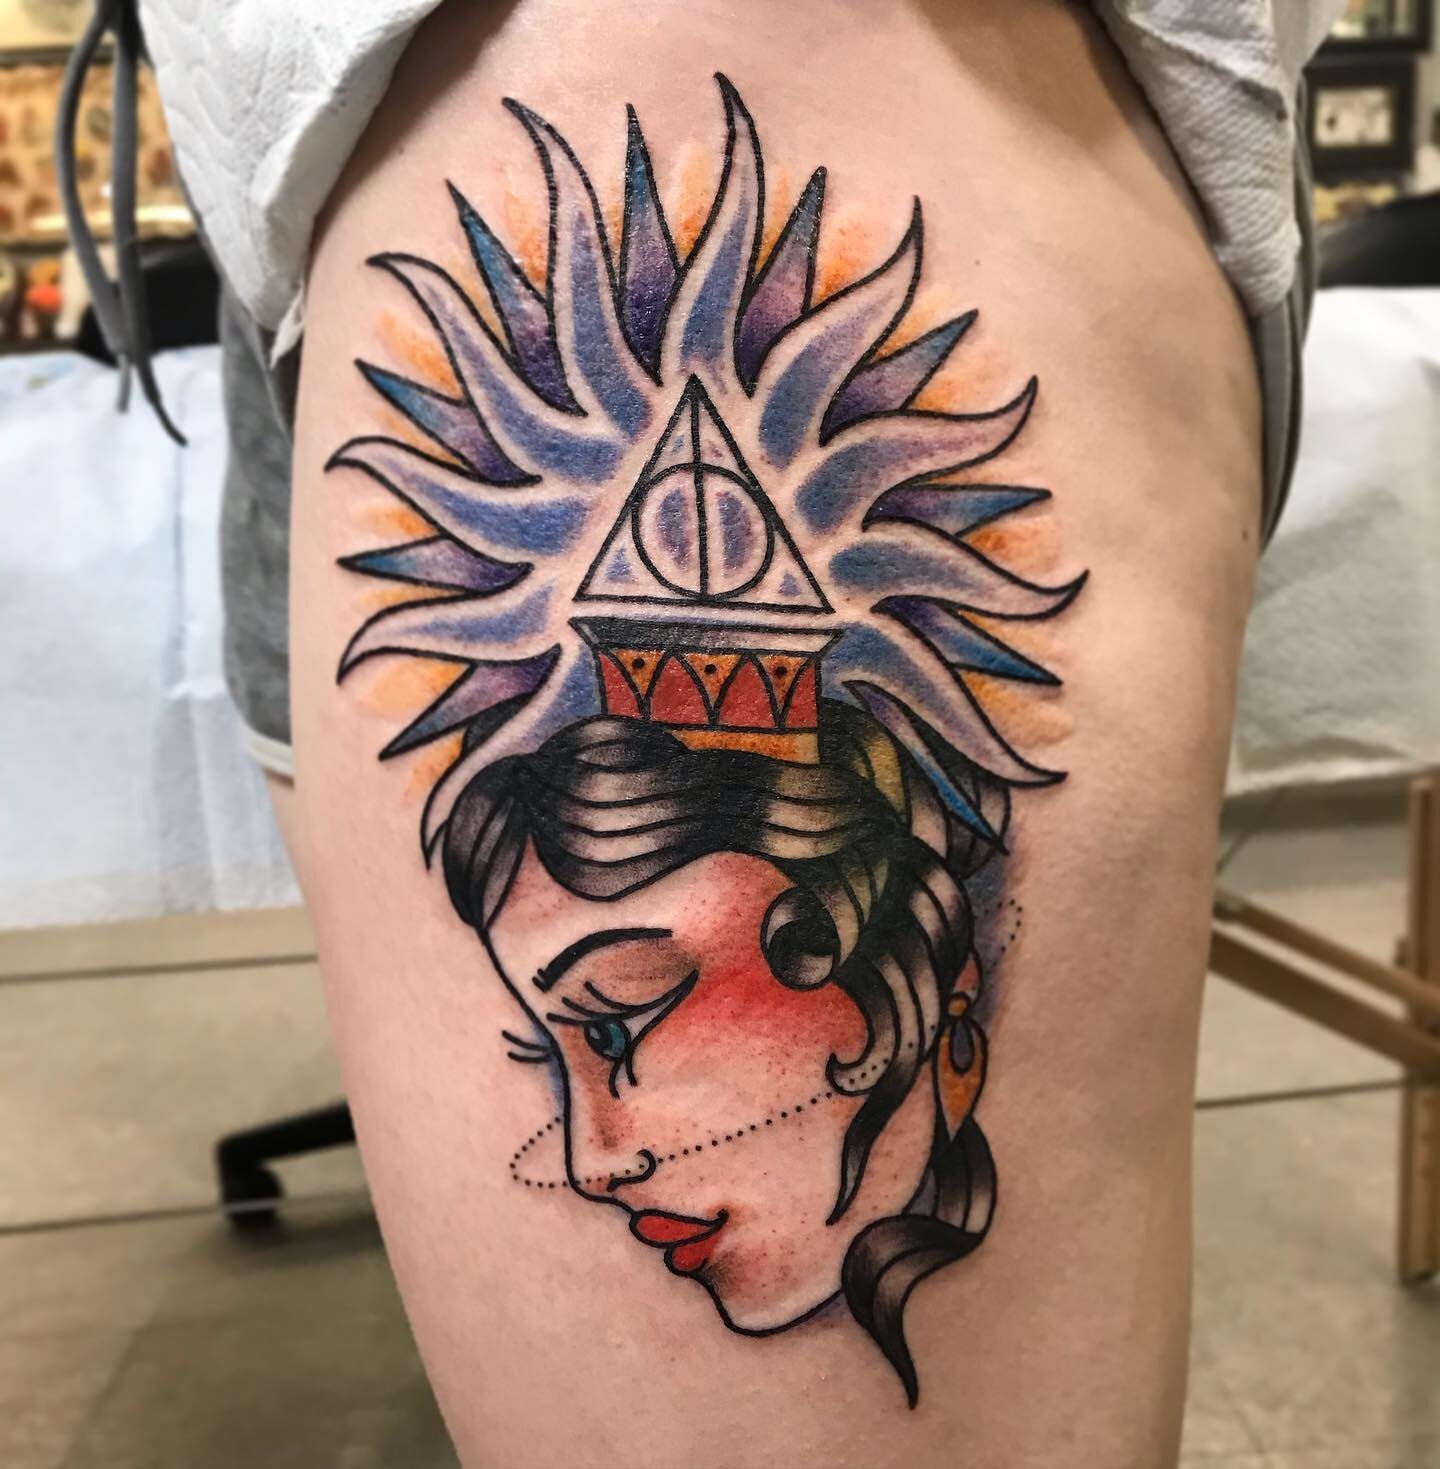 Lady head by @tattoos.by.holly !! 
Give her a follow 🥳